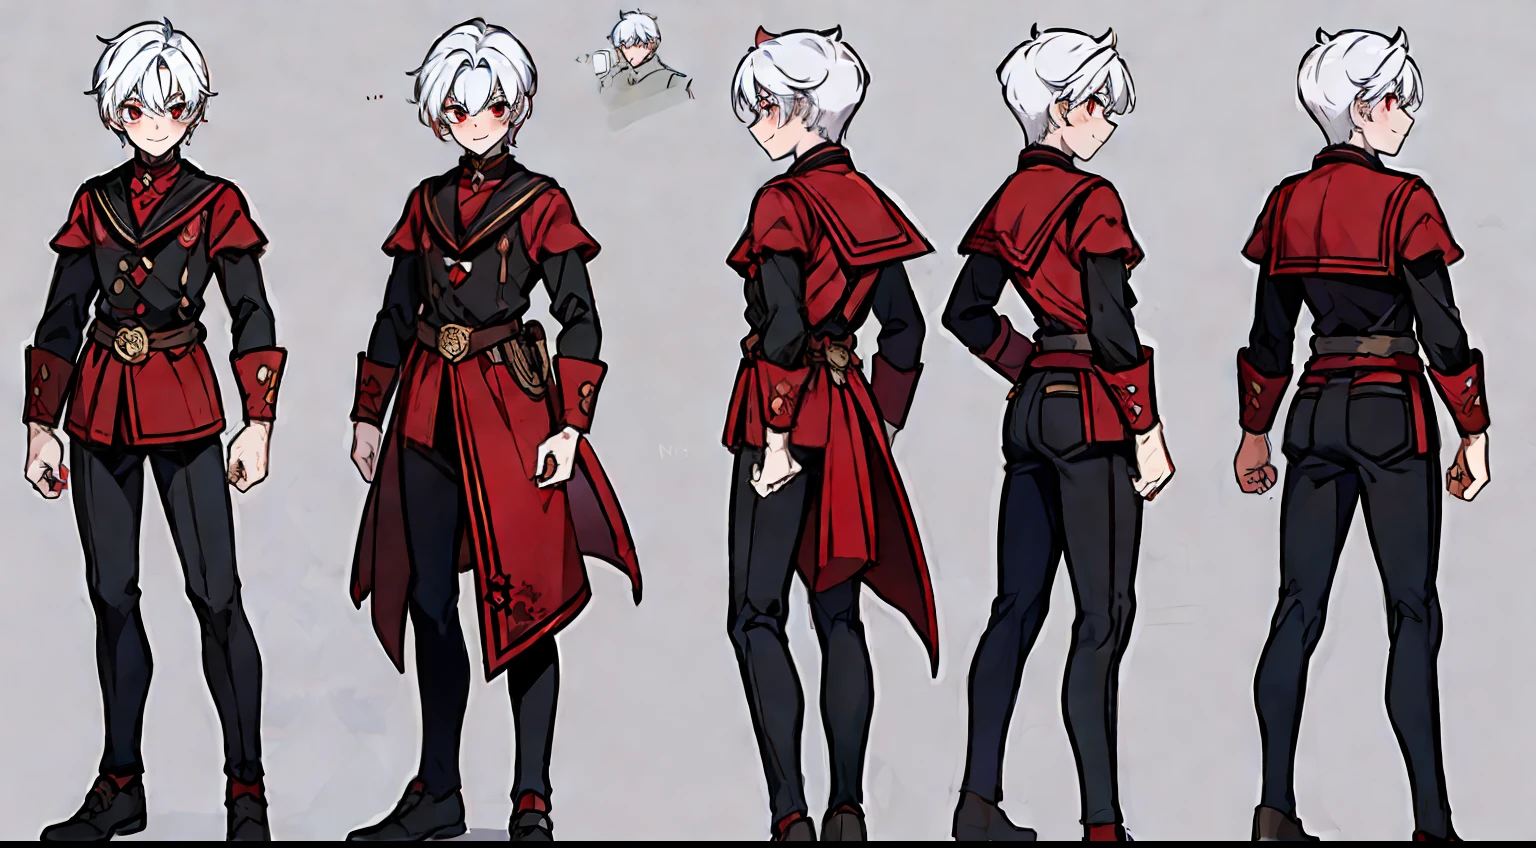 ((masterpiece)),(((best quality))),(character design sheet,same character,front,side,back), 1boy, solo, short white hair, red eyes, masterpiece, best quality, looking at around, full body, 150cm tall, detailed, smiling, black sailor outfit with short shorts, red rose as accessory, charturnbetalora, concept art, character concept art, character sketch, reference sheet, character sheet, (simple background, white background: 1.3)